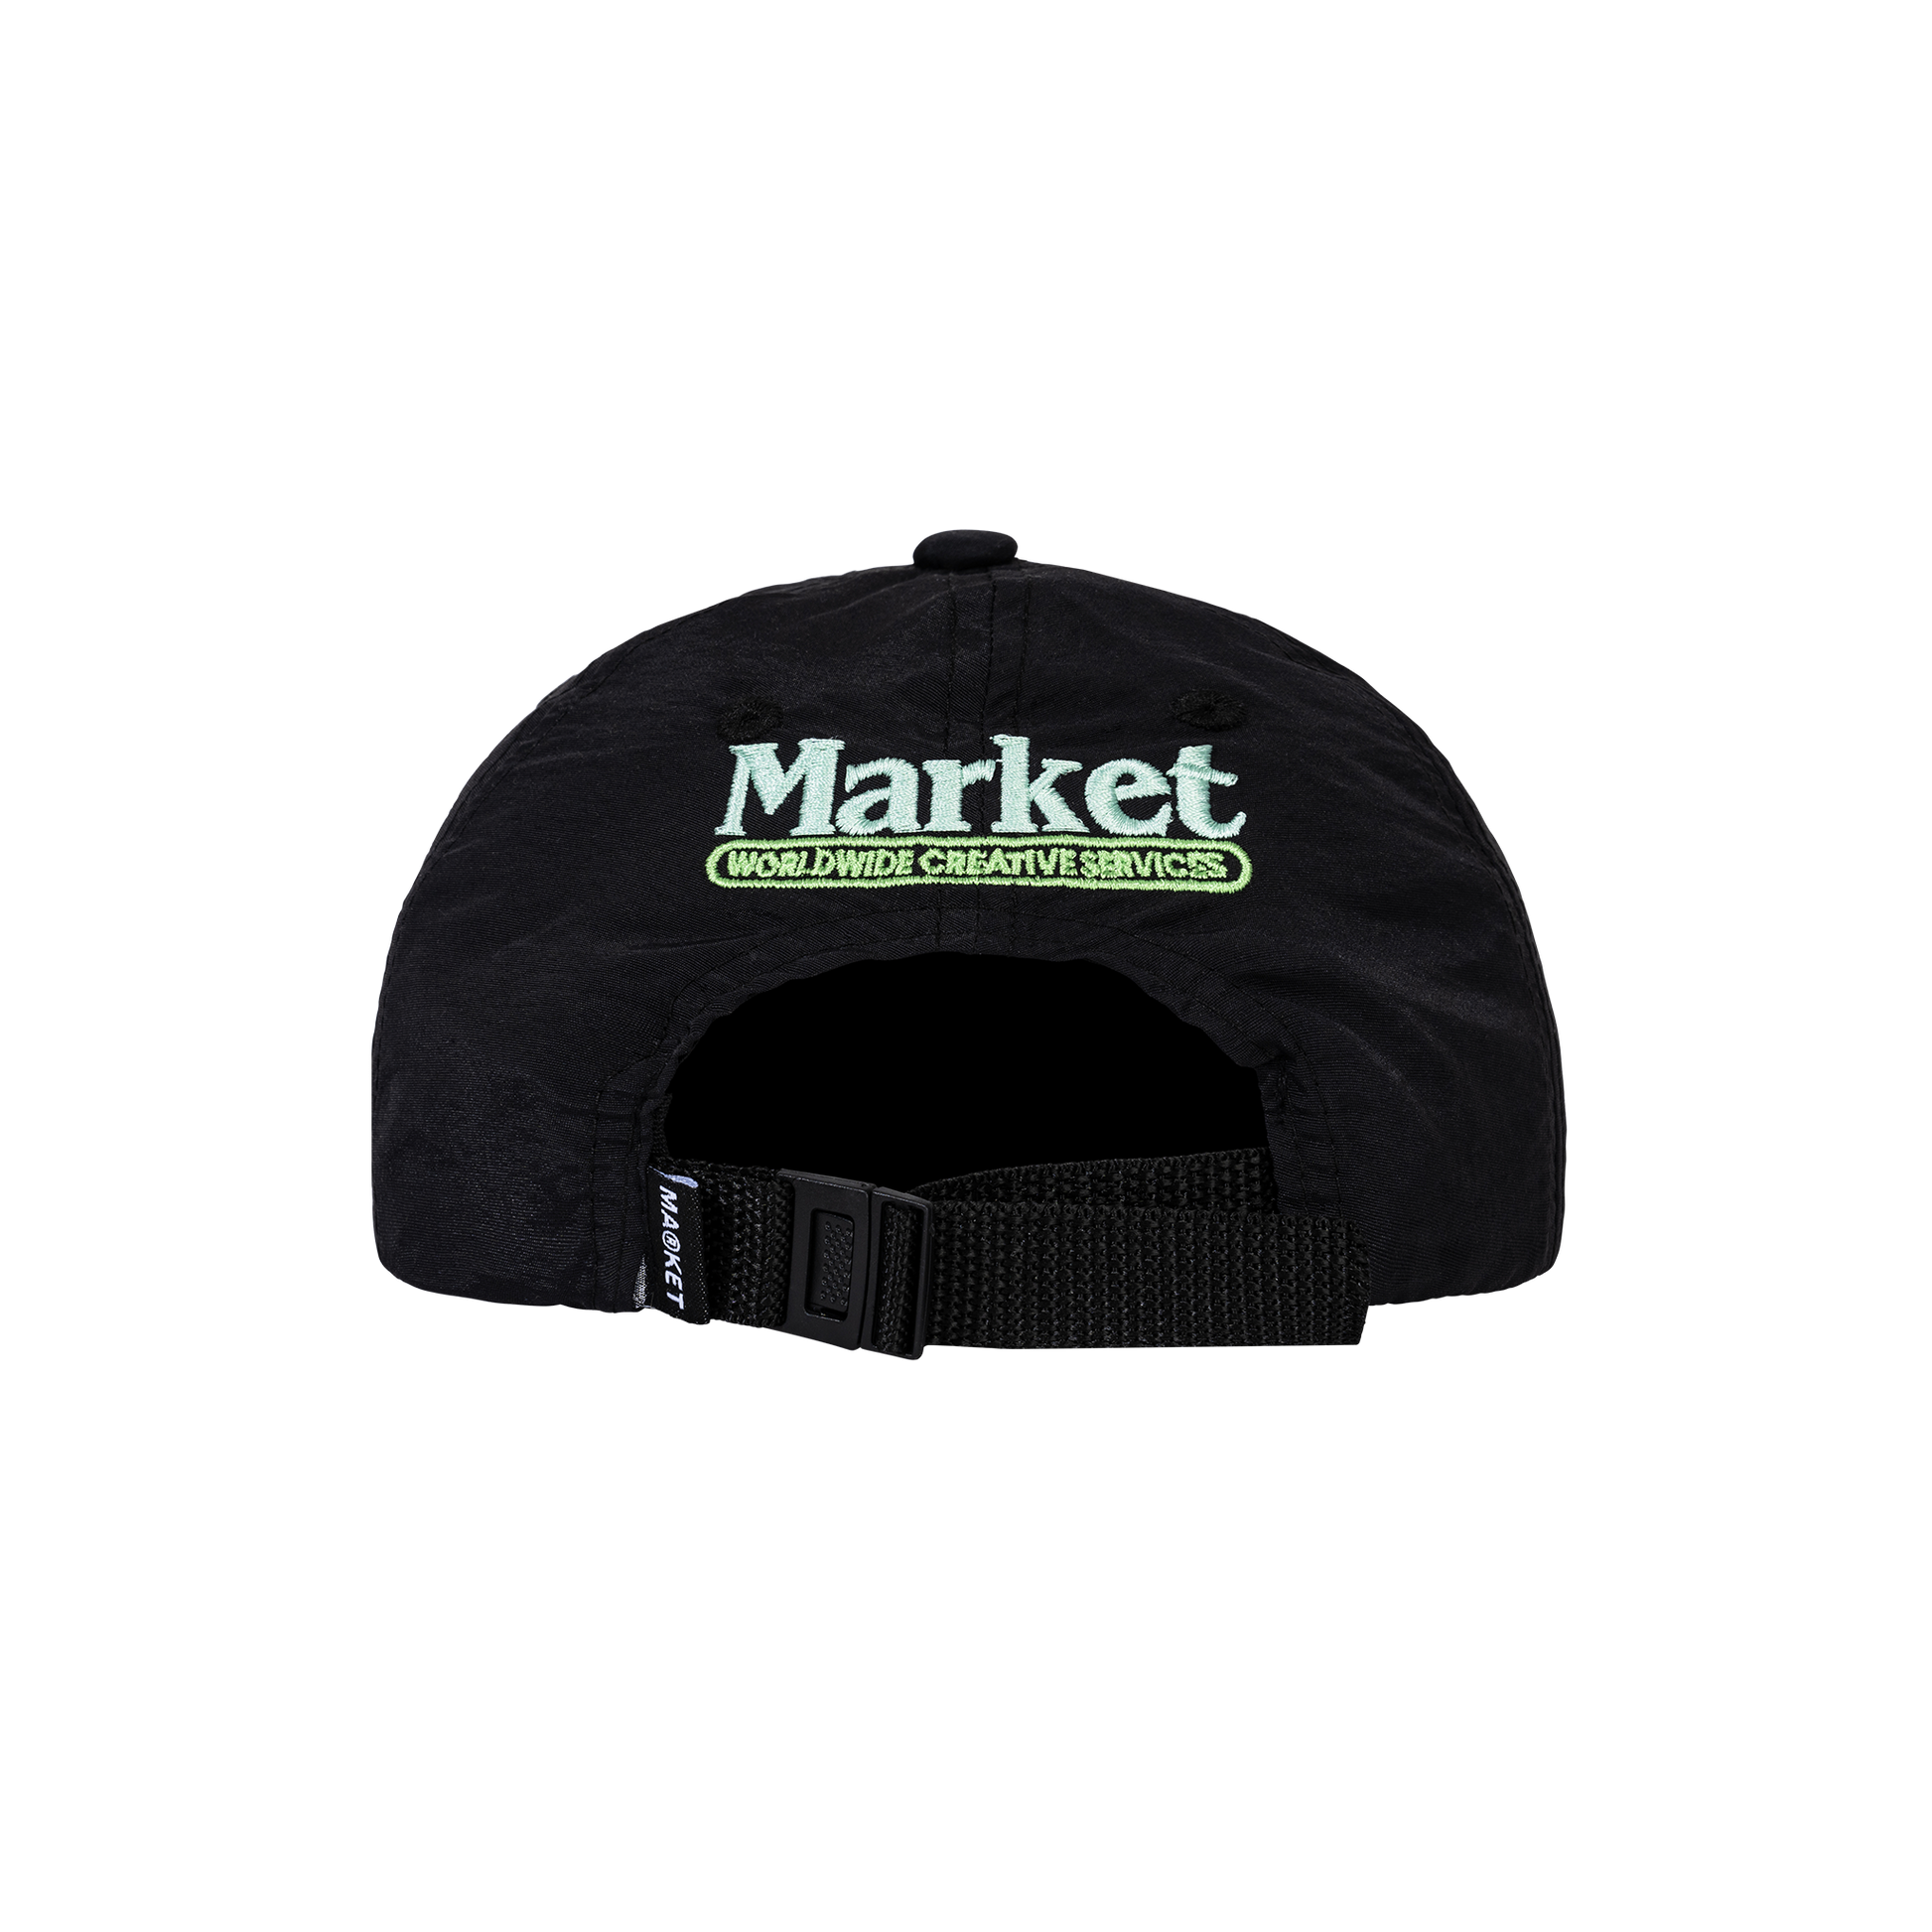 MARKET clothing brand CREATIVE SERVICES TECH HAT. Find more graphic tees, hats, beanies, hoodies at MarketStudios.com. Formally Chinatown Market. 